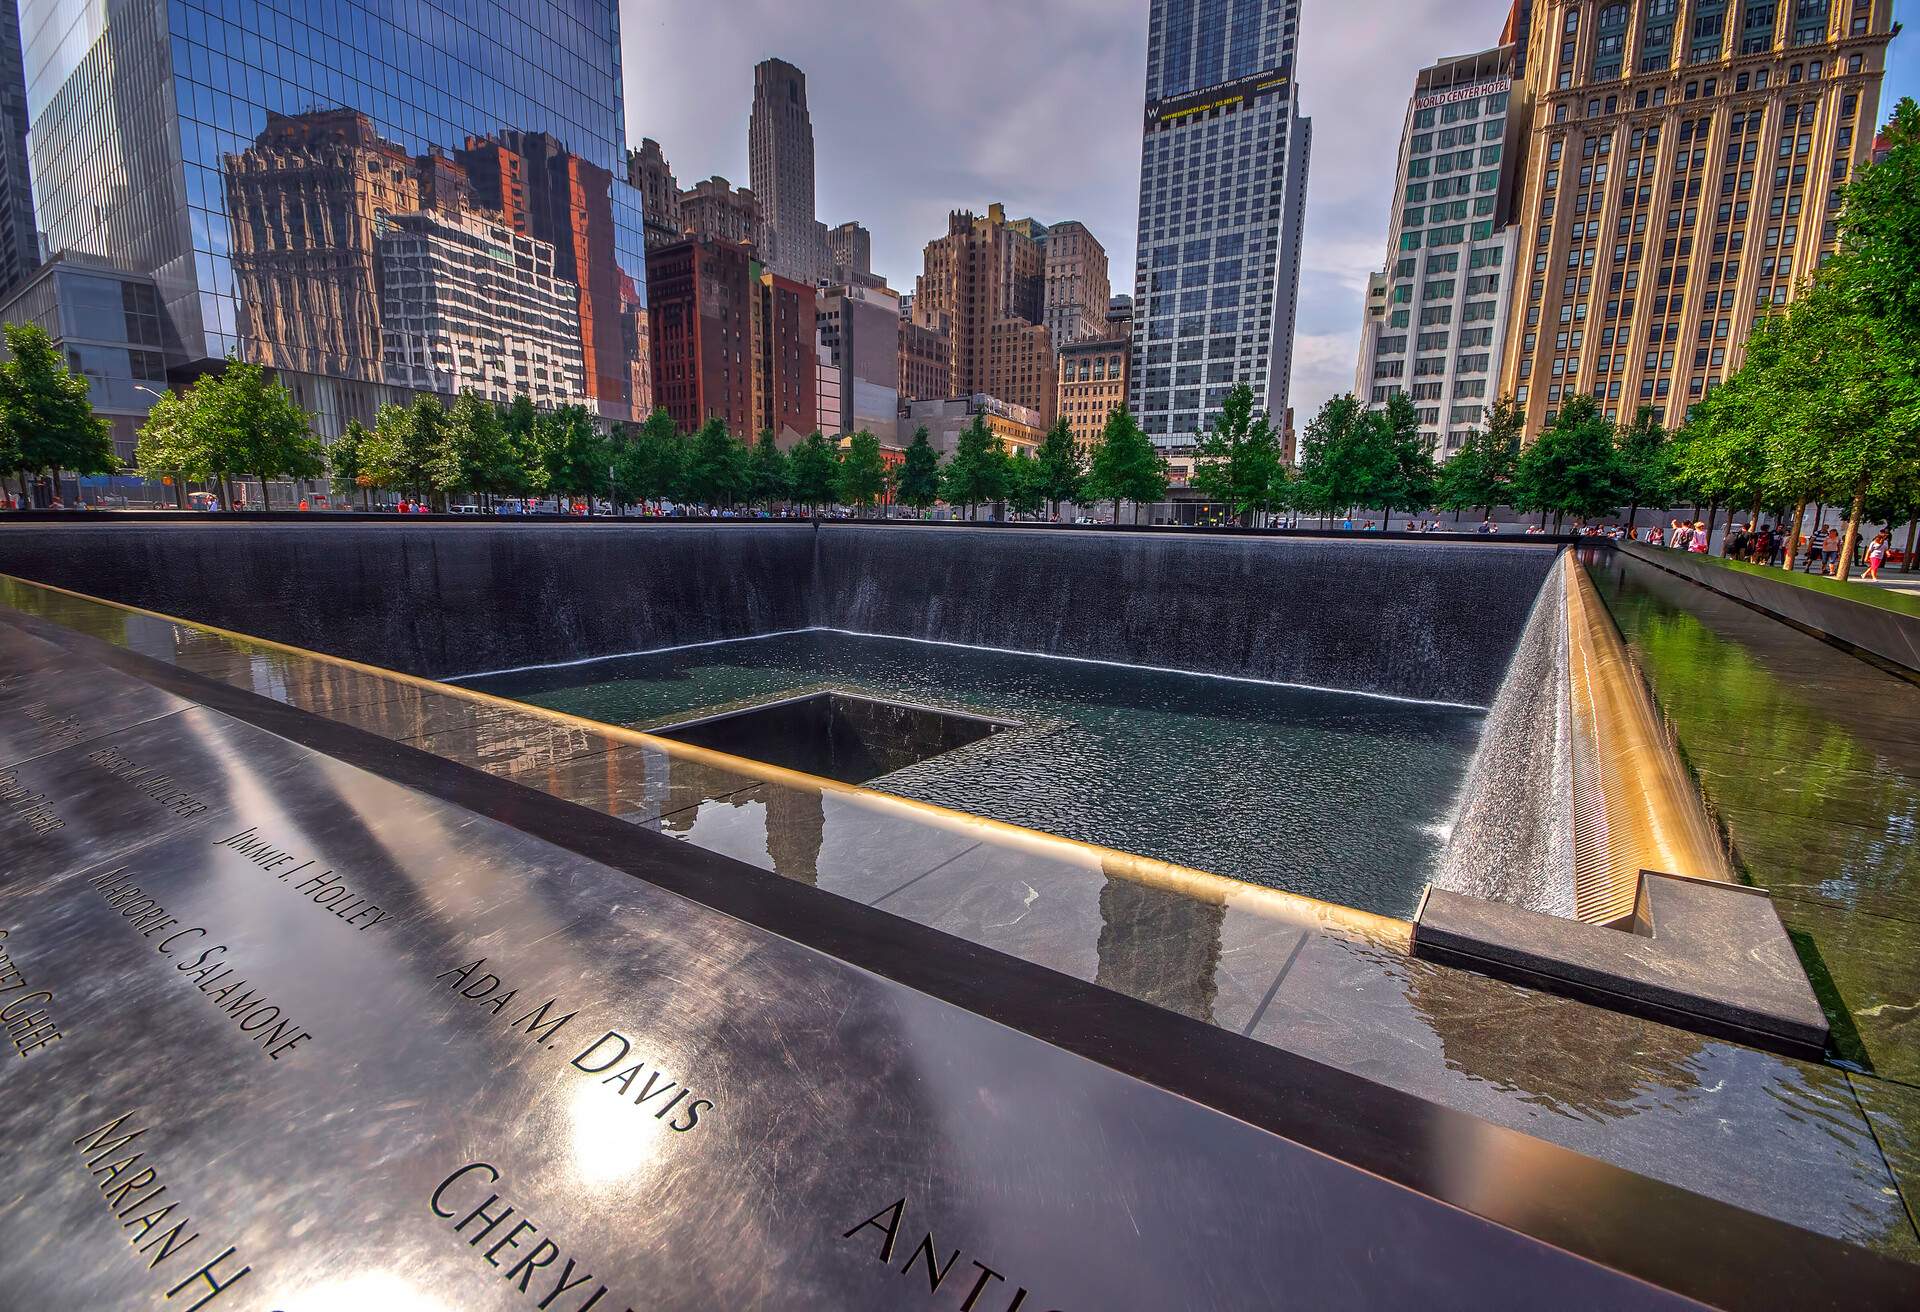 The National September 11 Memorial & Museum (also known as the 9/11 Memorial and 9/11 Memorial Museum) is the principal memorial and museum commemorating the September 11 attacks of 2001. The memorial is located at the World Trade Center site, Manhattan, New York. Photo taken in August